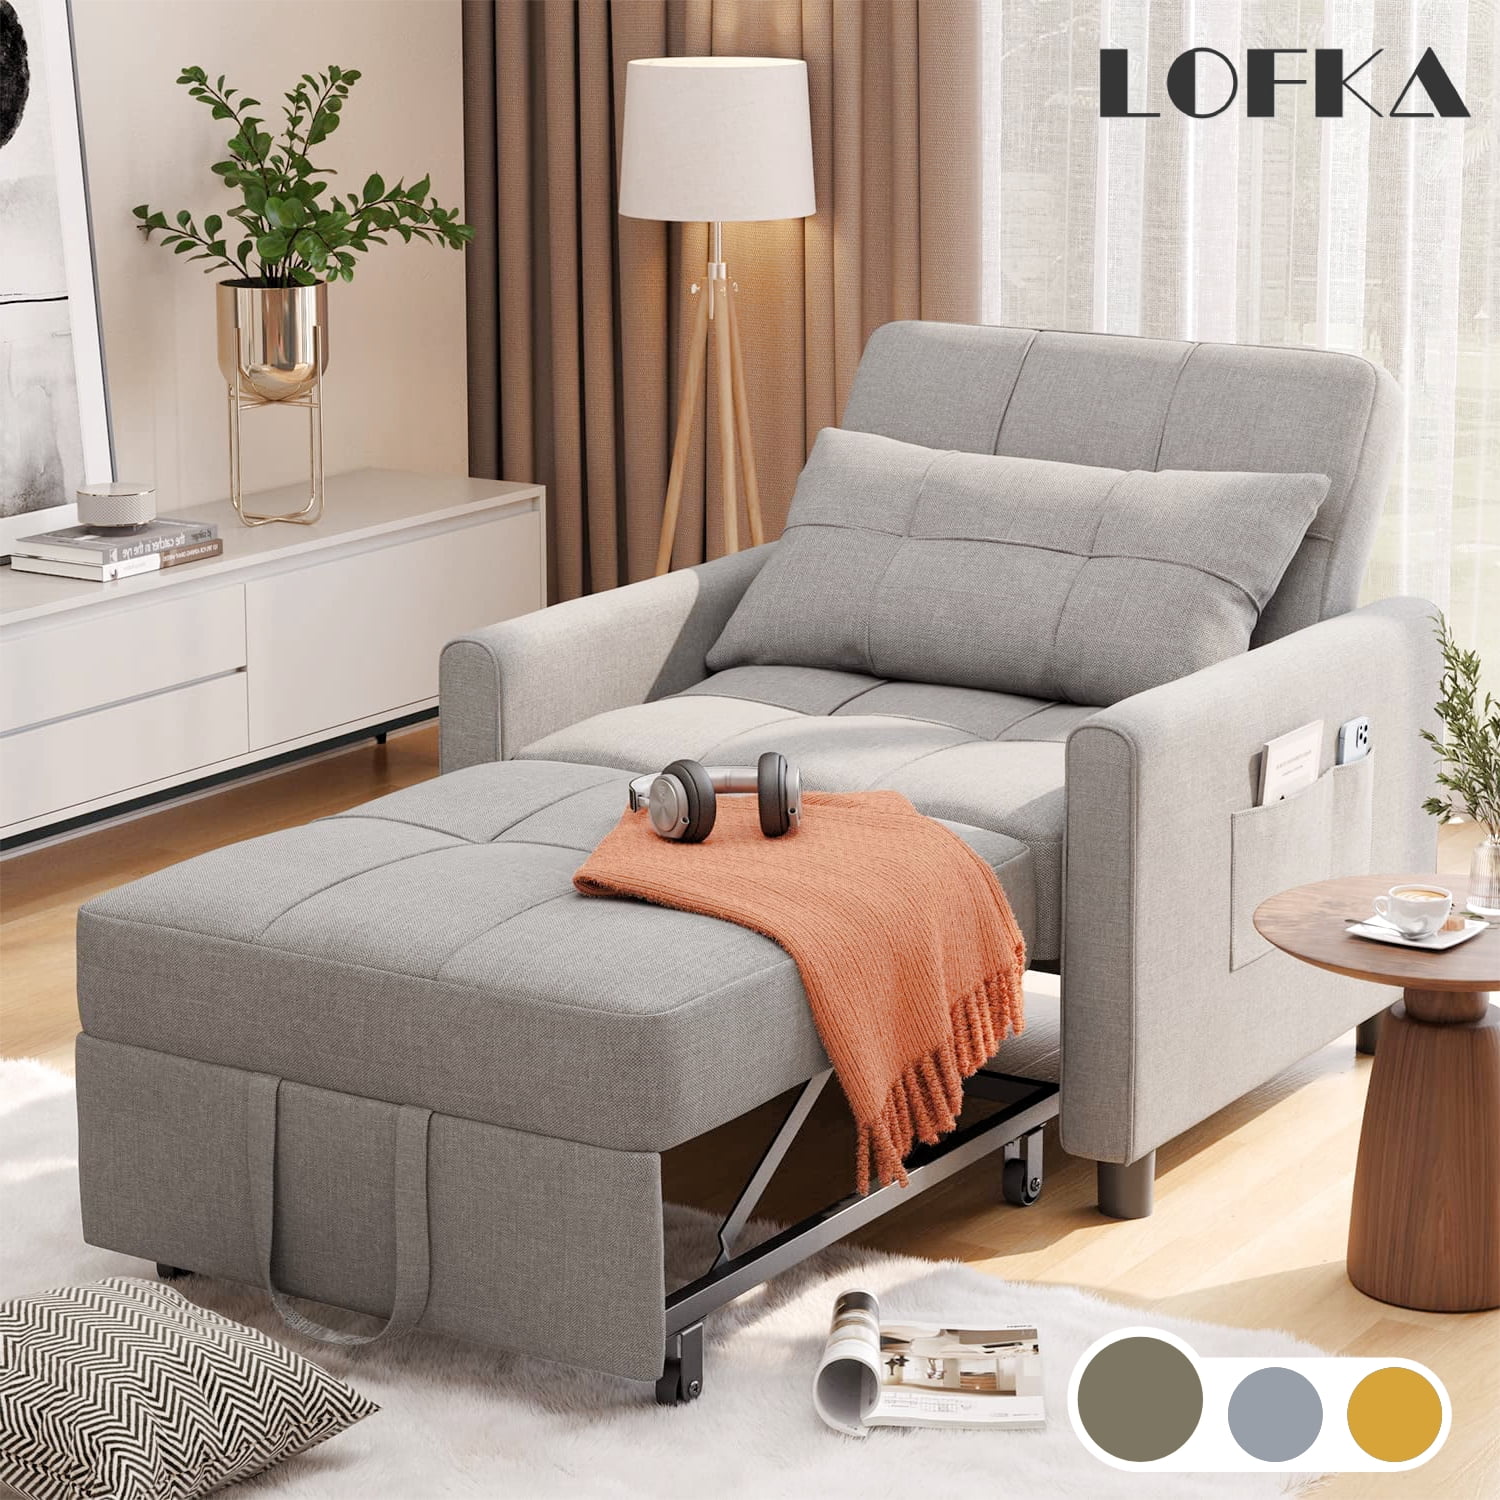 Lofka Chair Bed, Convertible Sofa Bed Couch Recliner Single Bed for Living  Room/Office/Bedroom, Light Gray